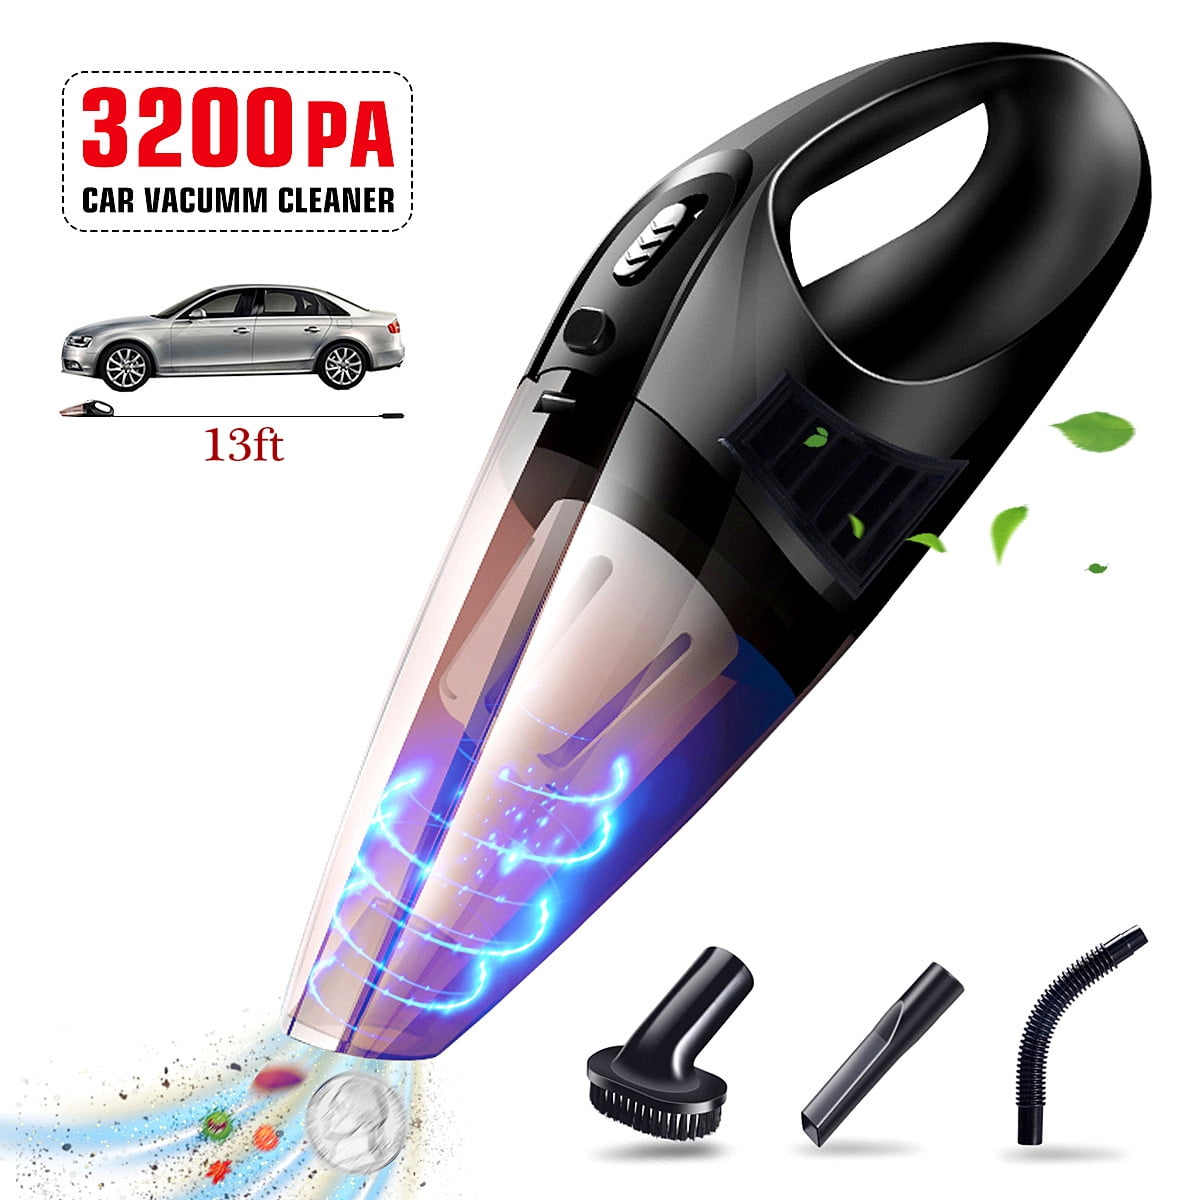 Powerful HandHeld 12V Car Vacuum Cleaner Portable Auto Wet & Dry Strong Duster 